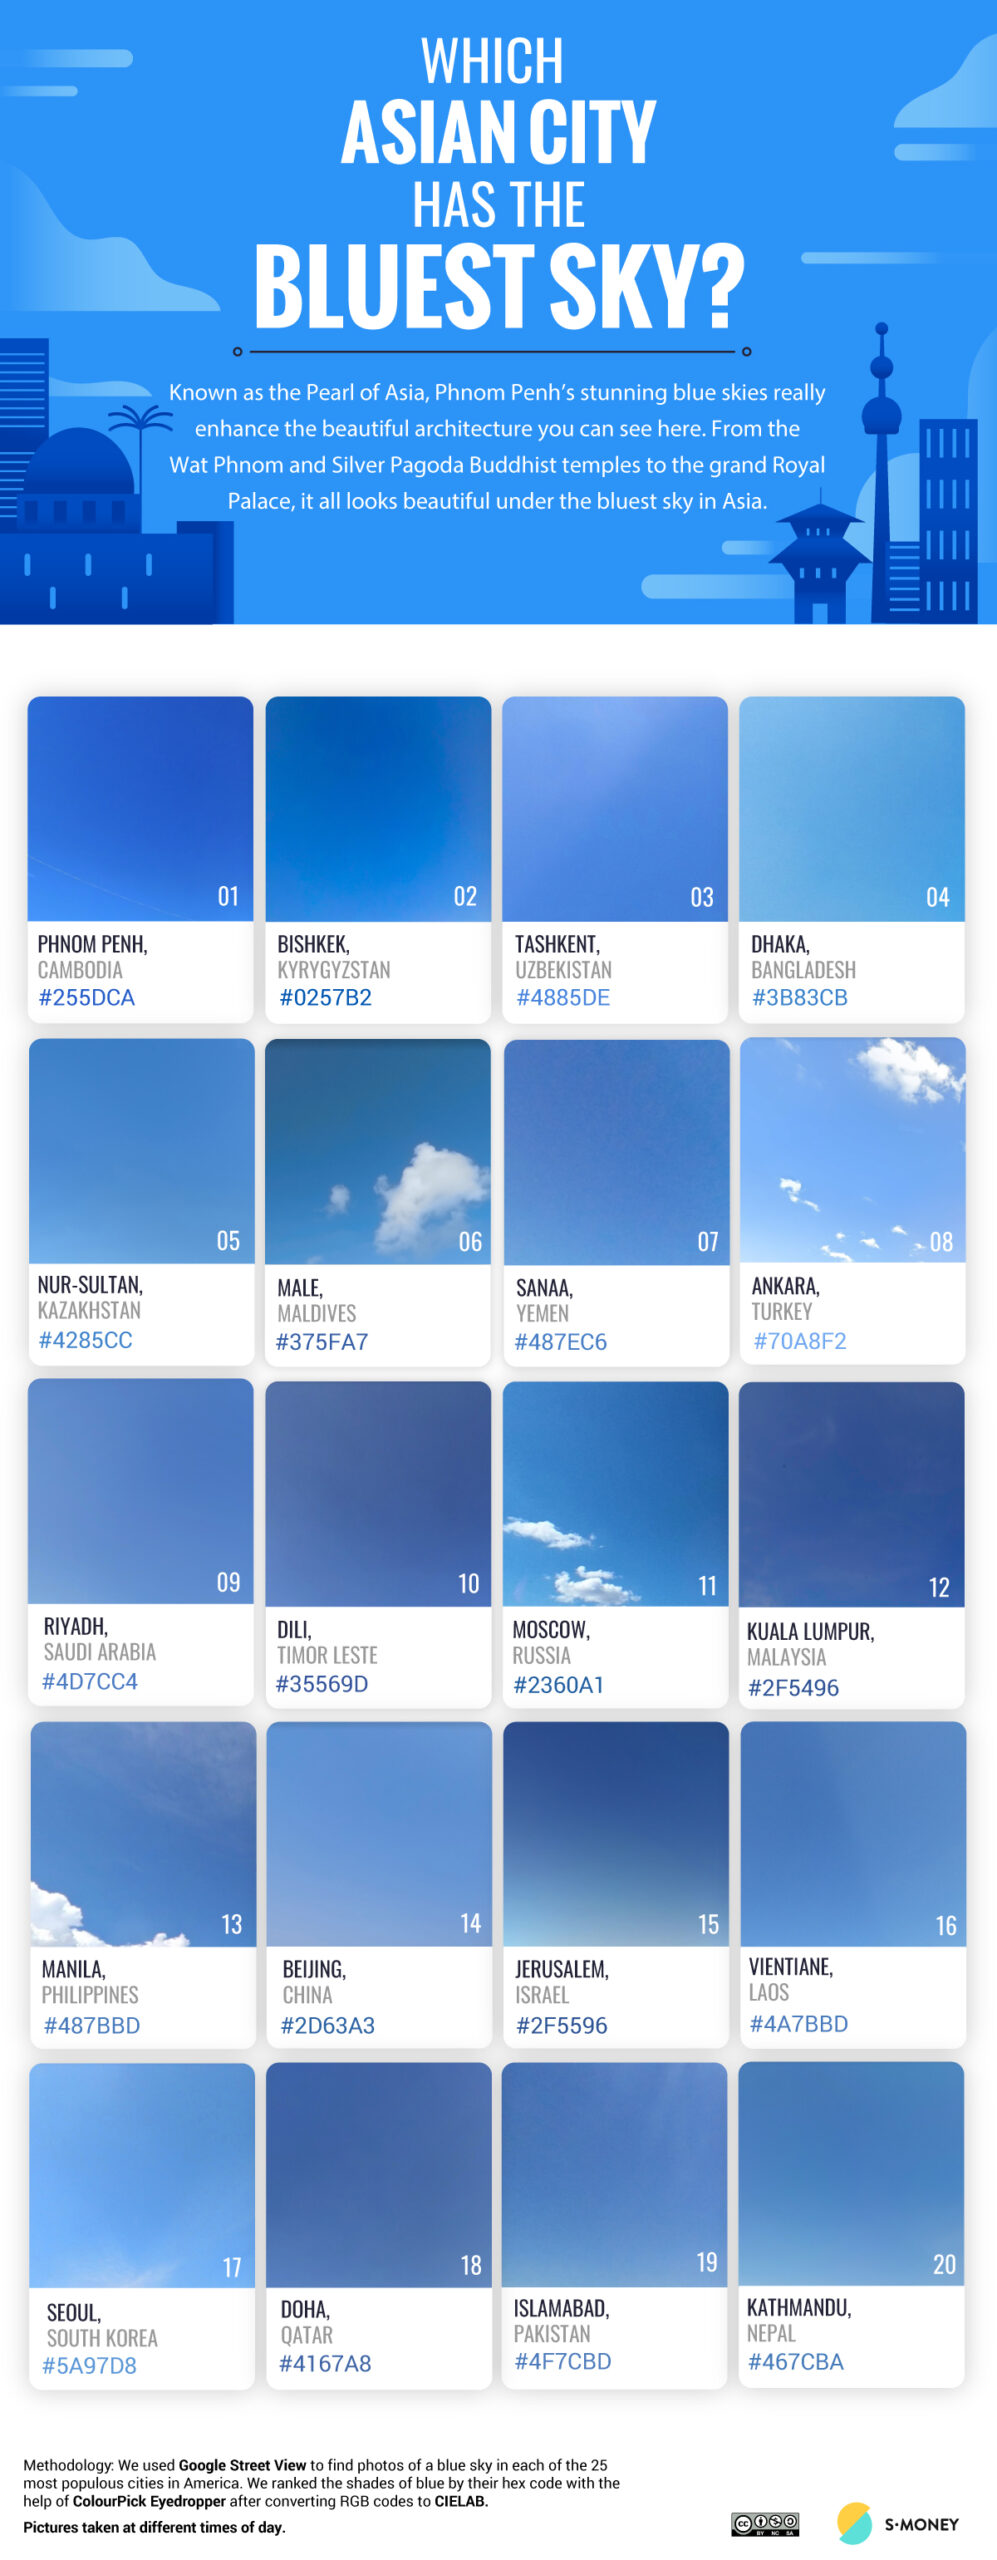 Which city has the bluest sky in Asia